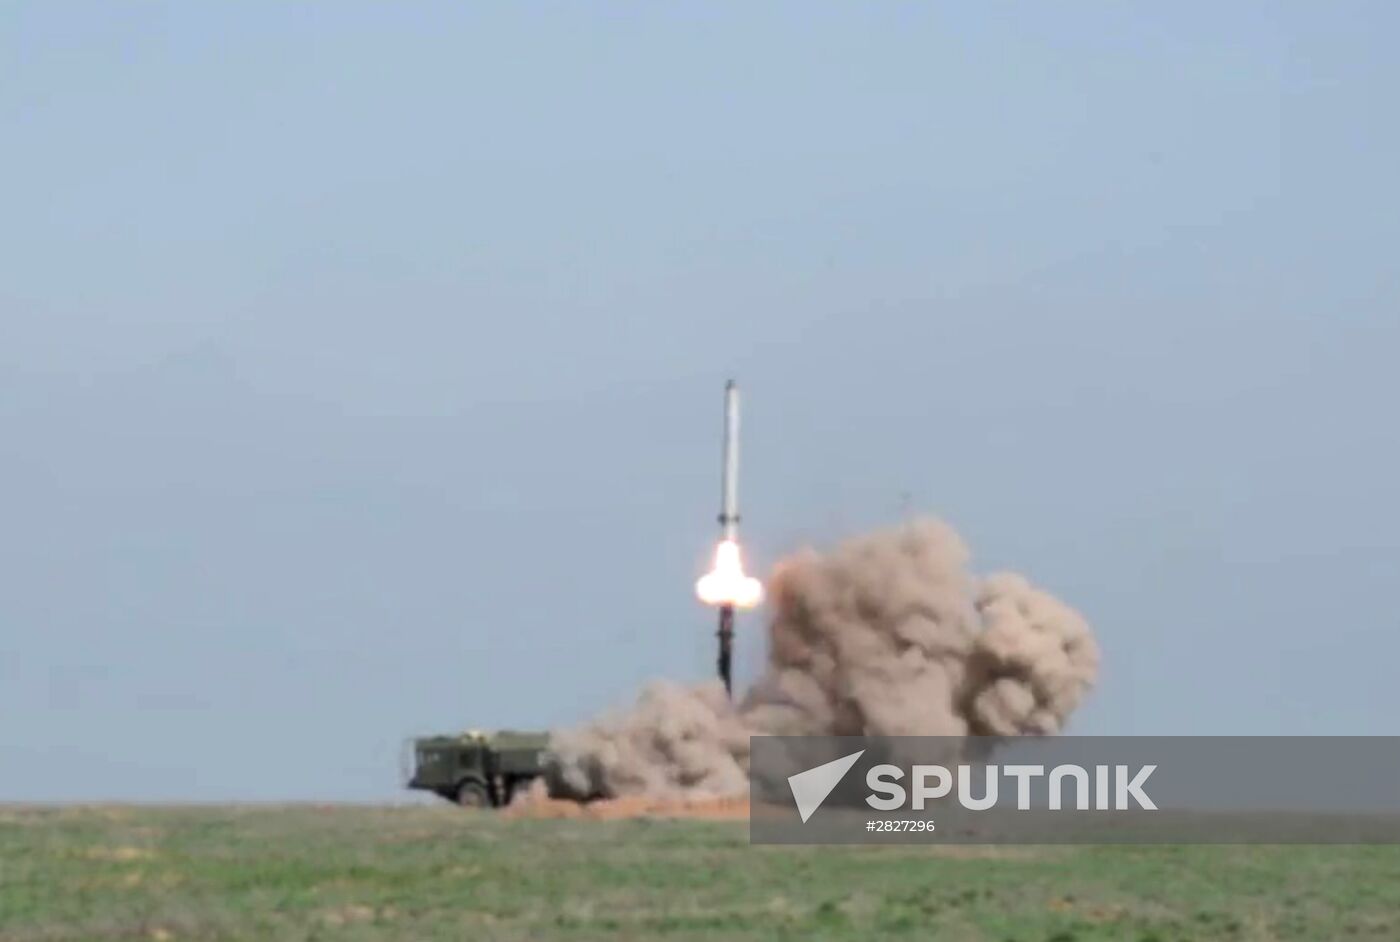 Iskander-M missile launchs from test range in Russia's Astrakhan region